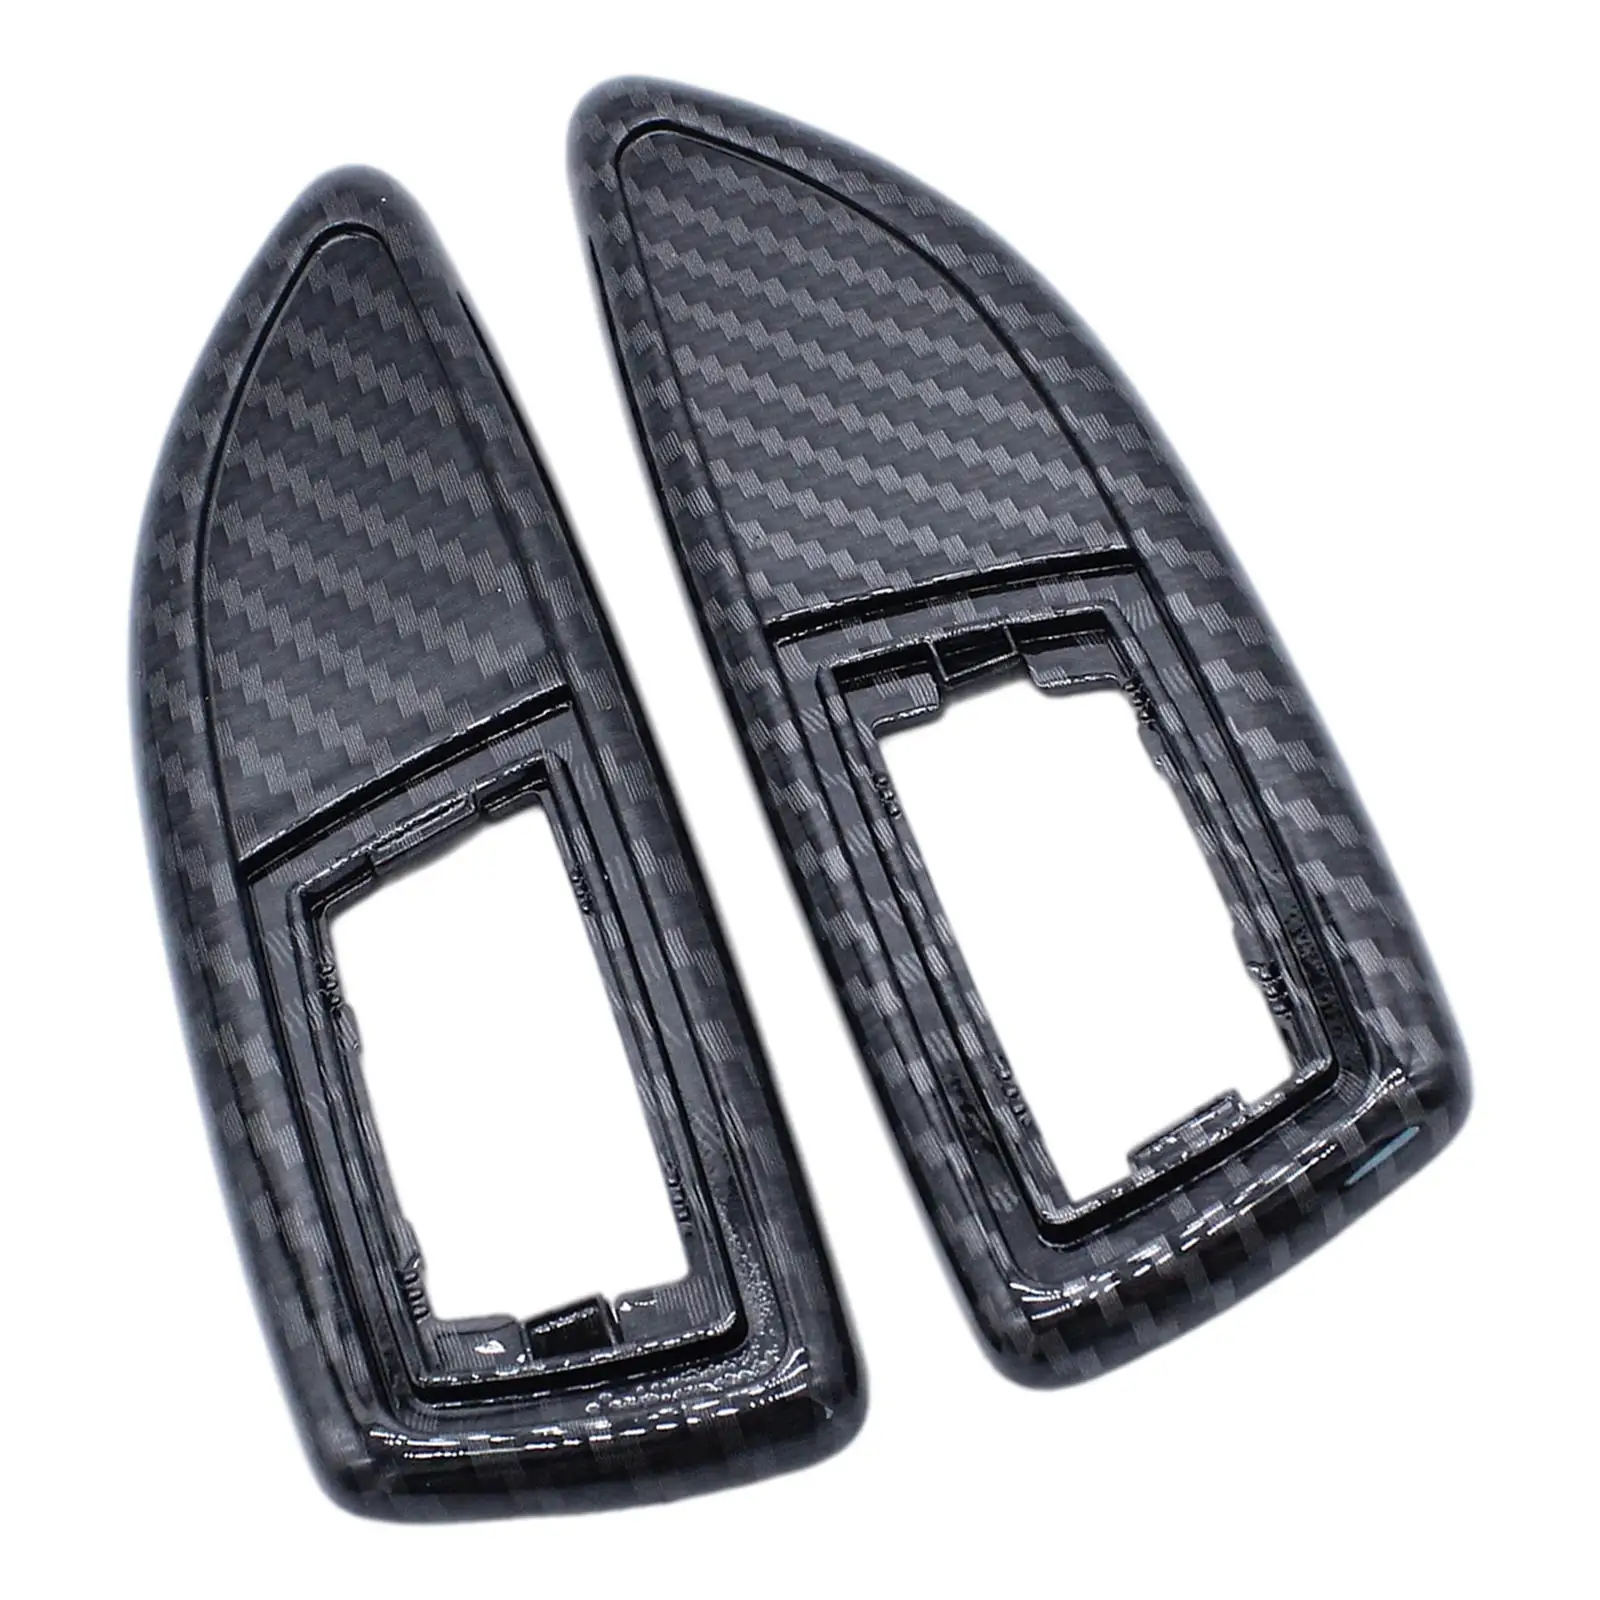 

2Pcs Side Wing Repeater Indicator Surrounds for Corsa D Series Replaces Professional